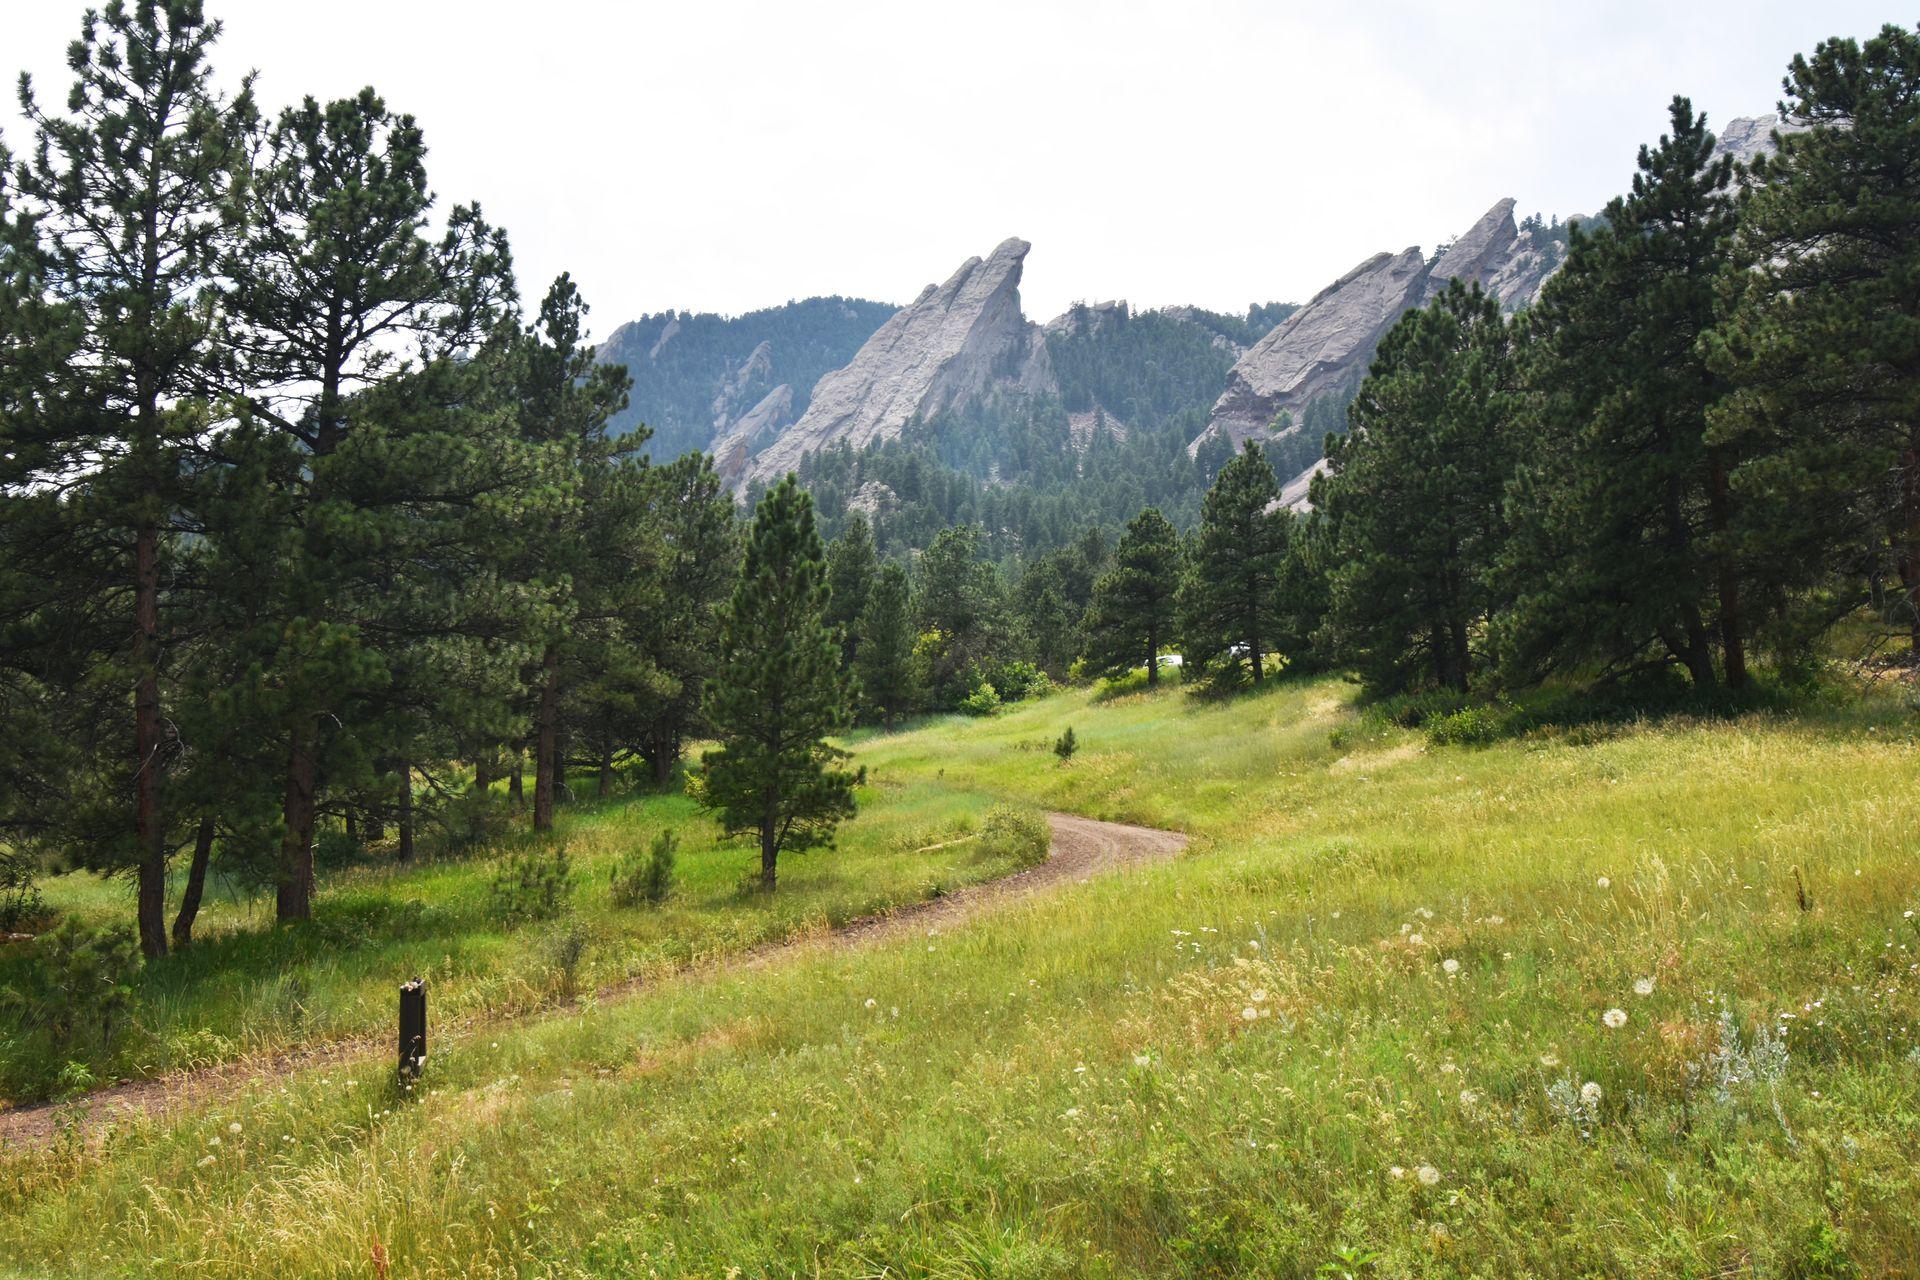 A trail winding through a meadow and trees with the Flatirons in the distance.